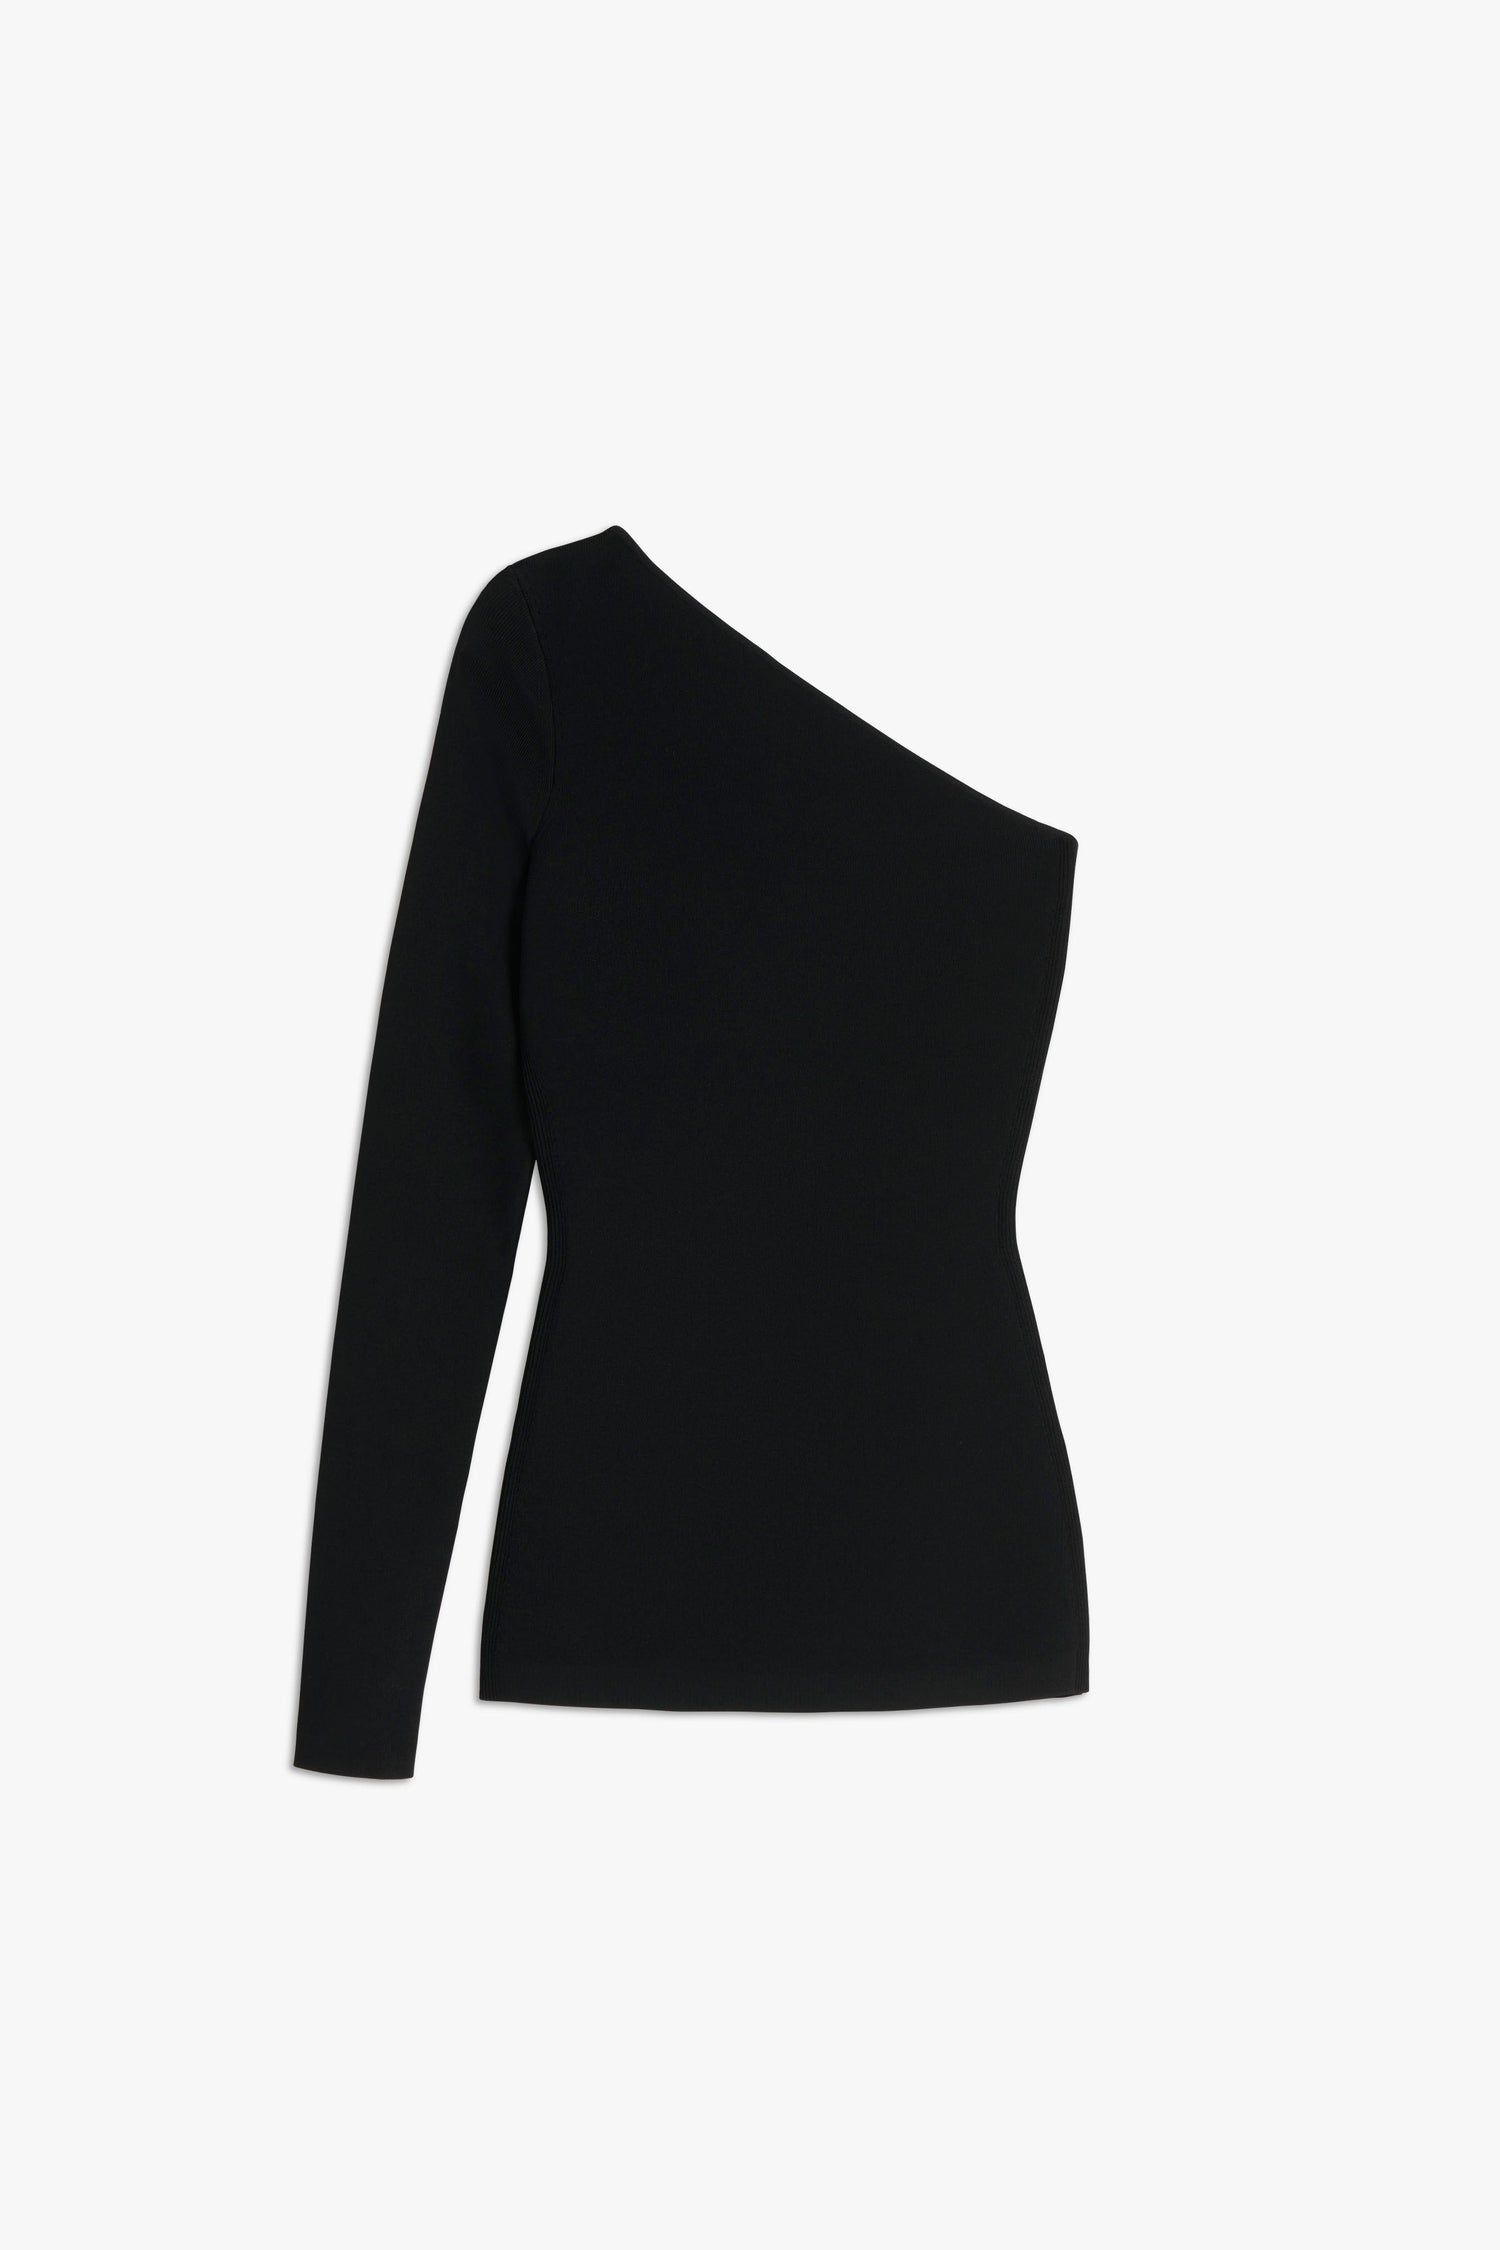 Product image of the black one shoulder long-sleeve top in a stretch fabric knit material. This knit top from Victoria Beckham is part of a knit co-ord set.